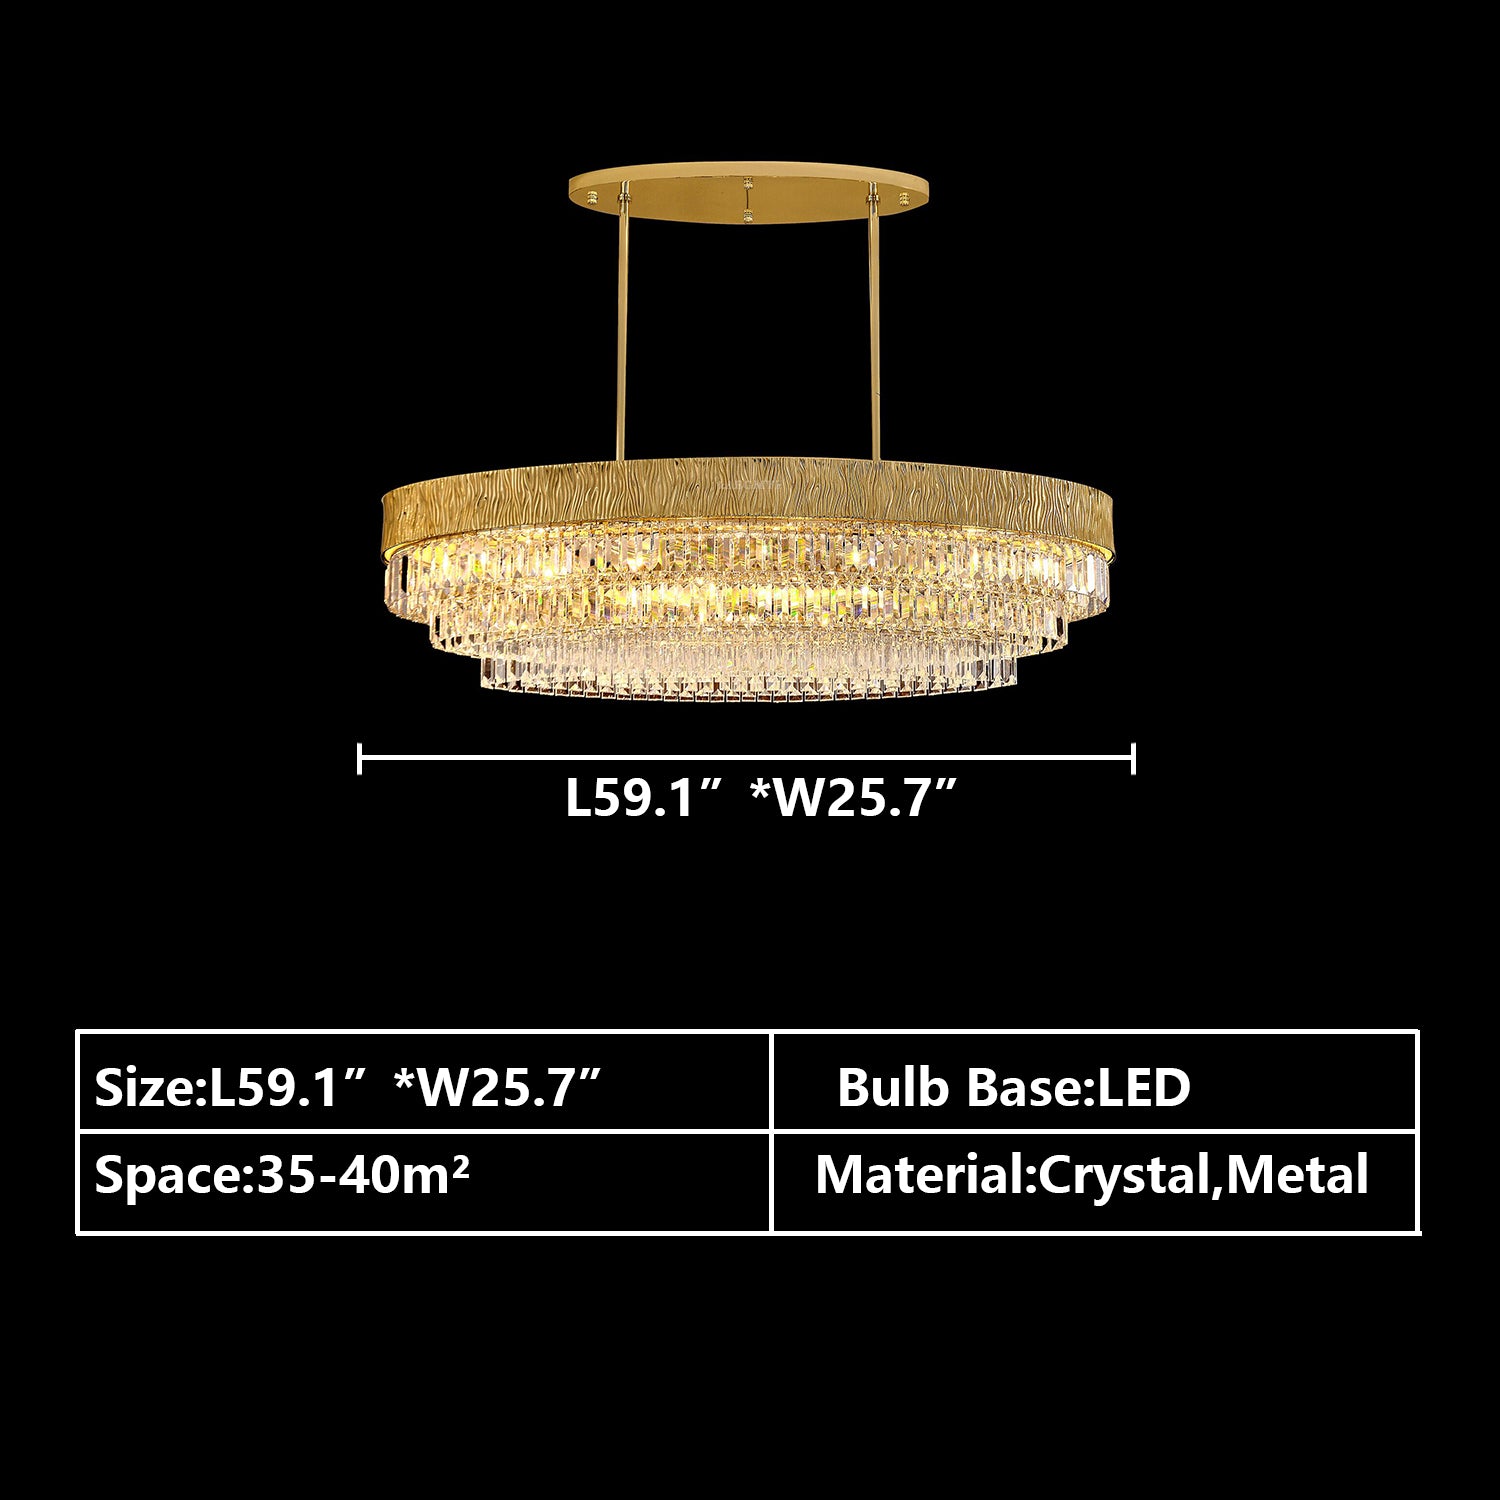 Oval:L59.1"*W25.7" chandelier,chandeliers,light,lamp,pendant,round,oval,tiers,layers,multi-tier,multi-layer,gold,luxury,light luxury,ceiling,chain,crystal,metal,living room,dining room,bedroom,dining table,bar,hallway